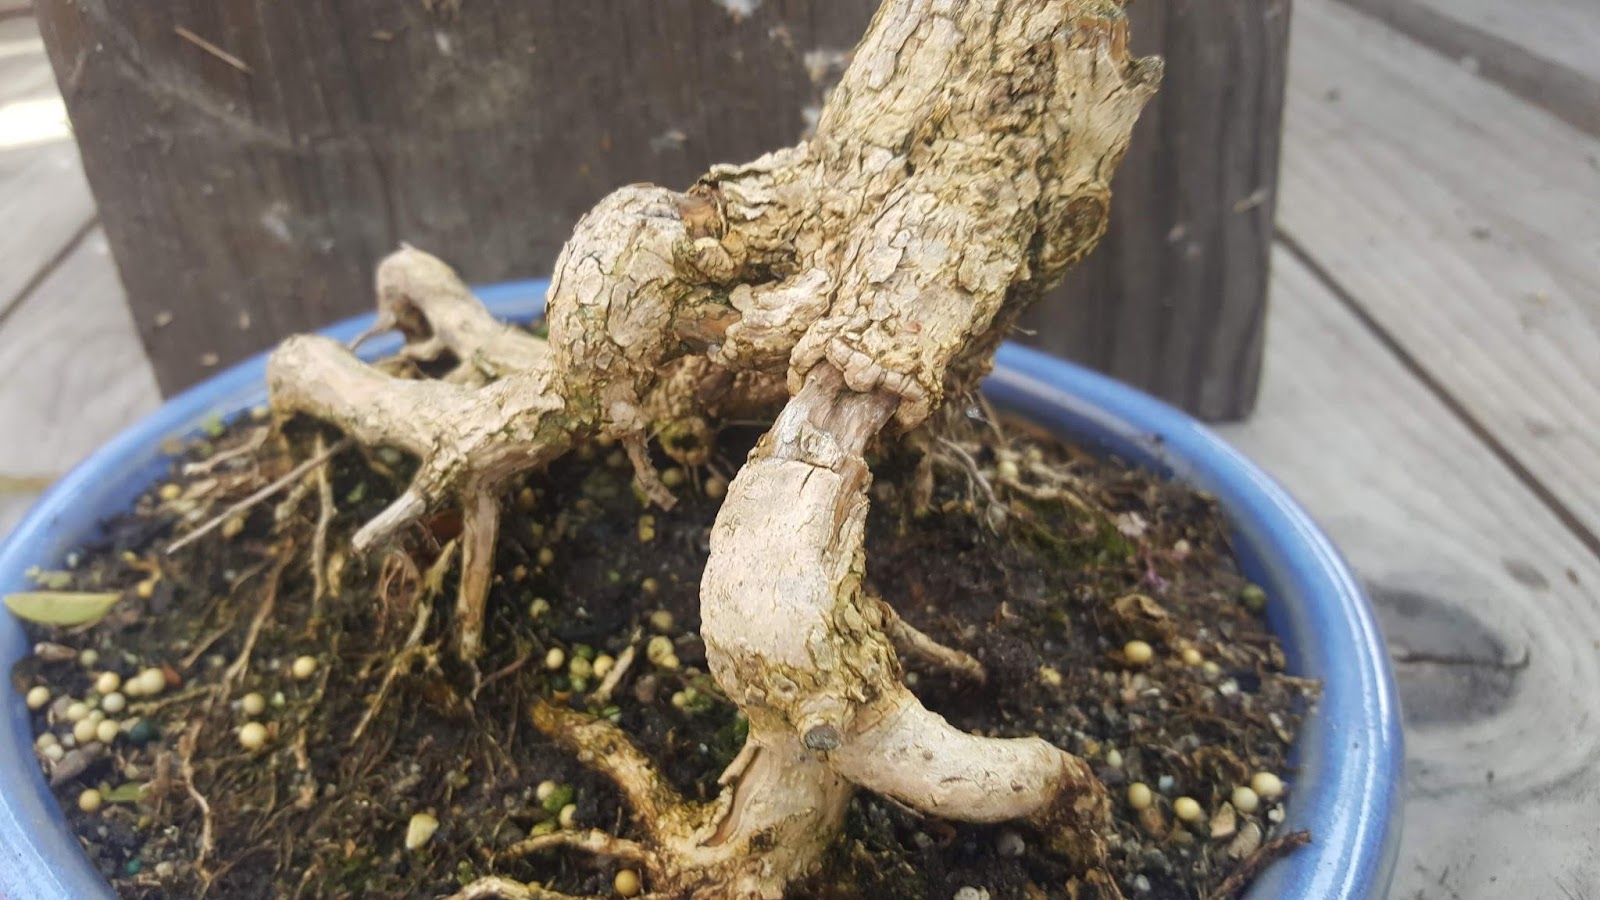 exposed roots